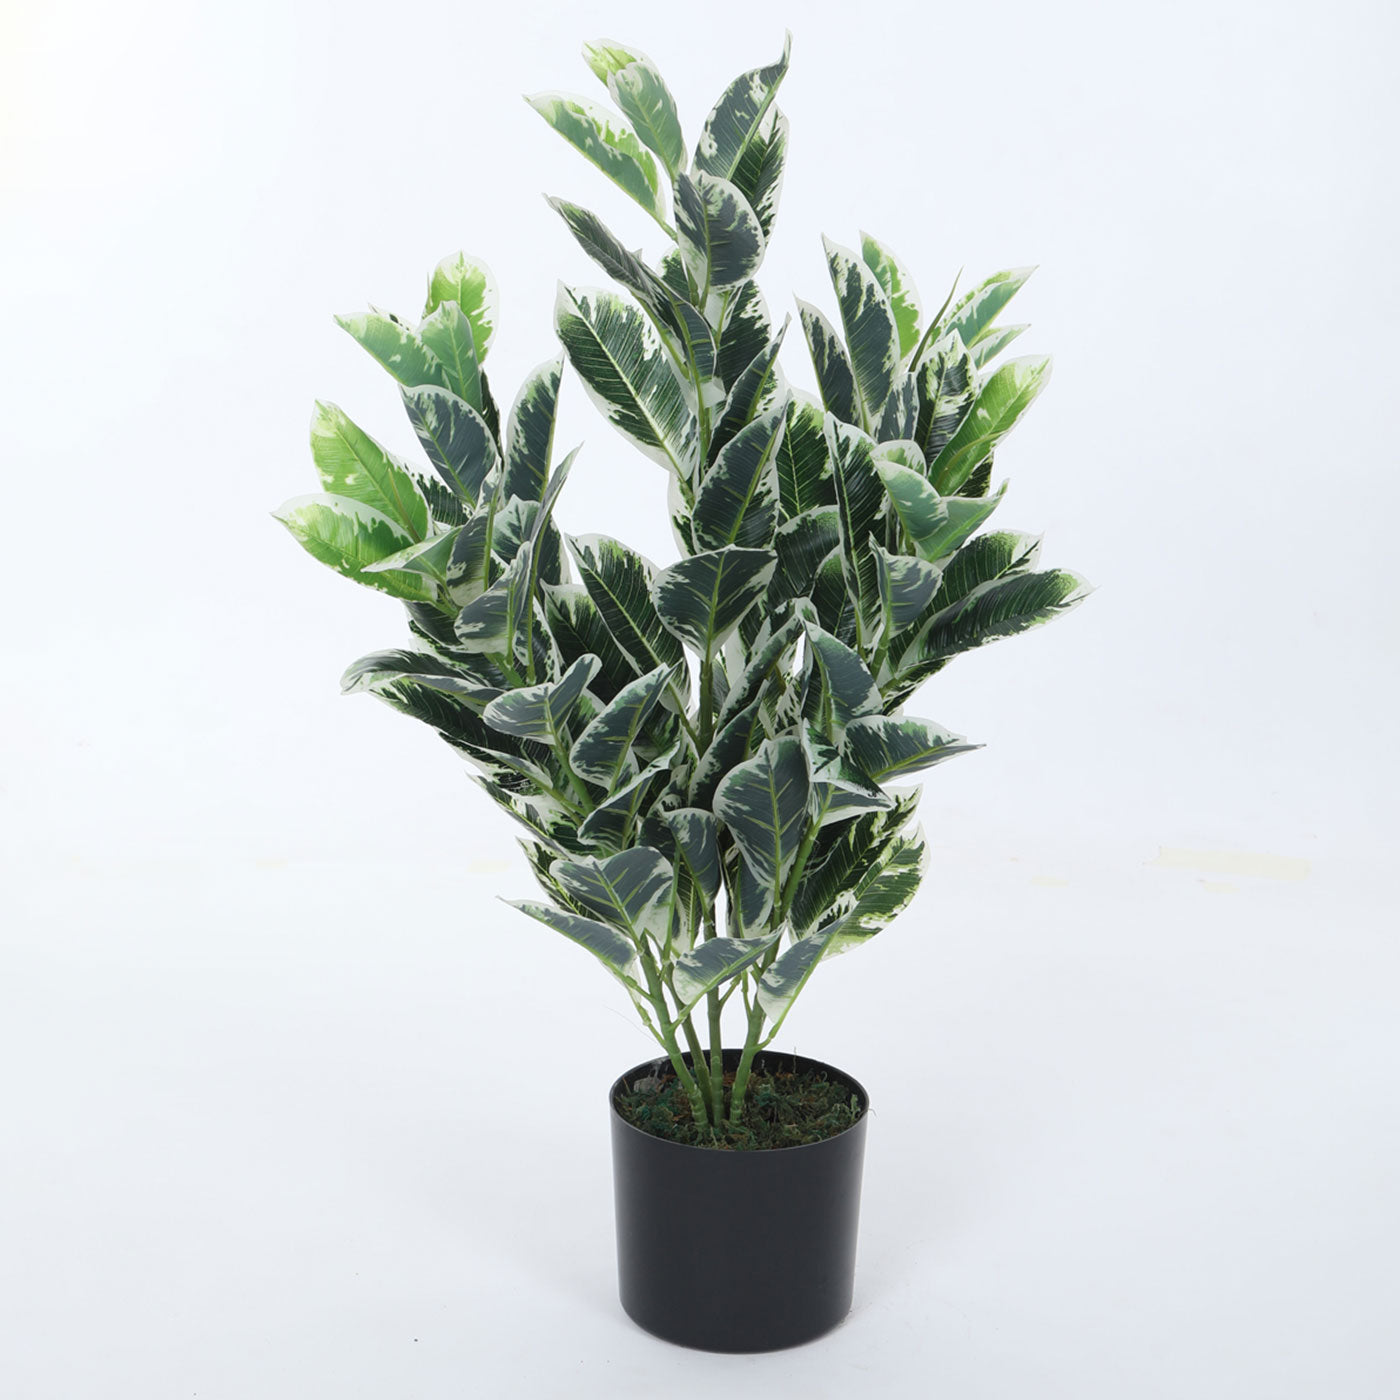 Artificial Real Touch Zebra Plant | Ornamental Plant for Interior Decor/Home Decor/Office Decor | with Basic Black Pot | 85 cm Short Indoor Tropical Plant | Durable